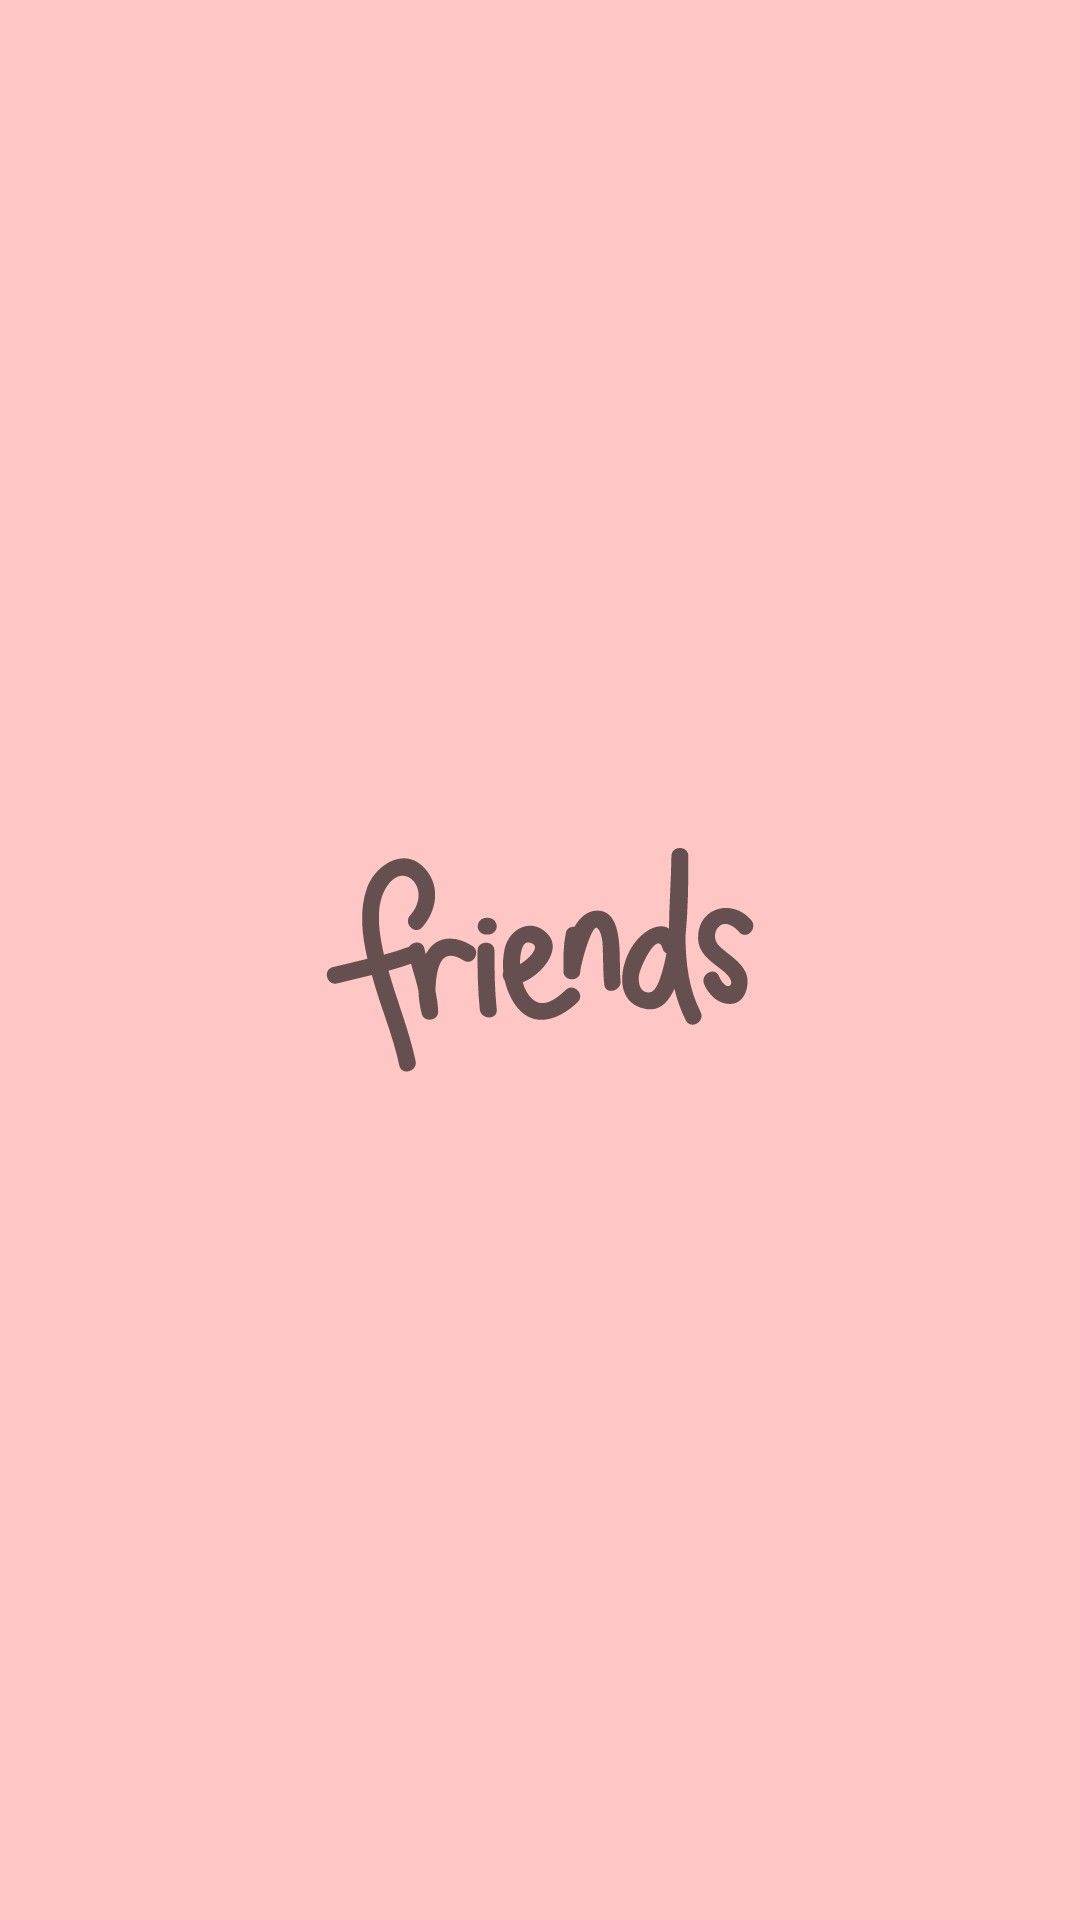 Tumblr Friends Wallpapers - Top Free Tumblr Friends Backgrounds ...